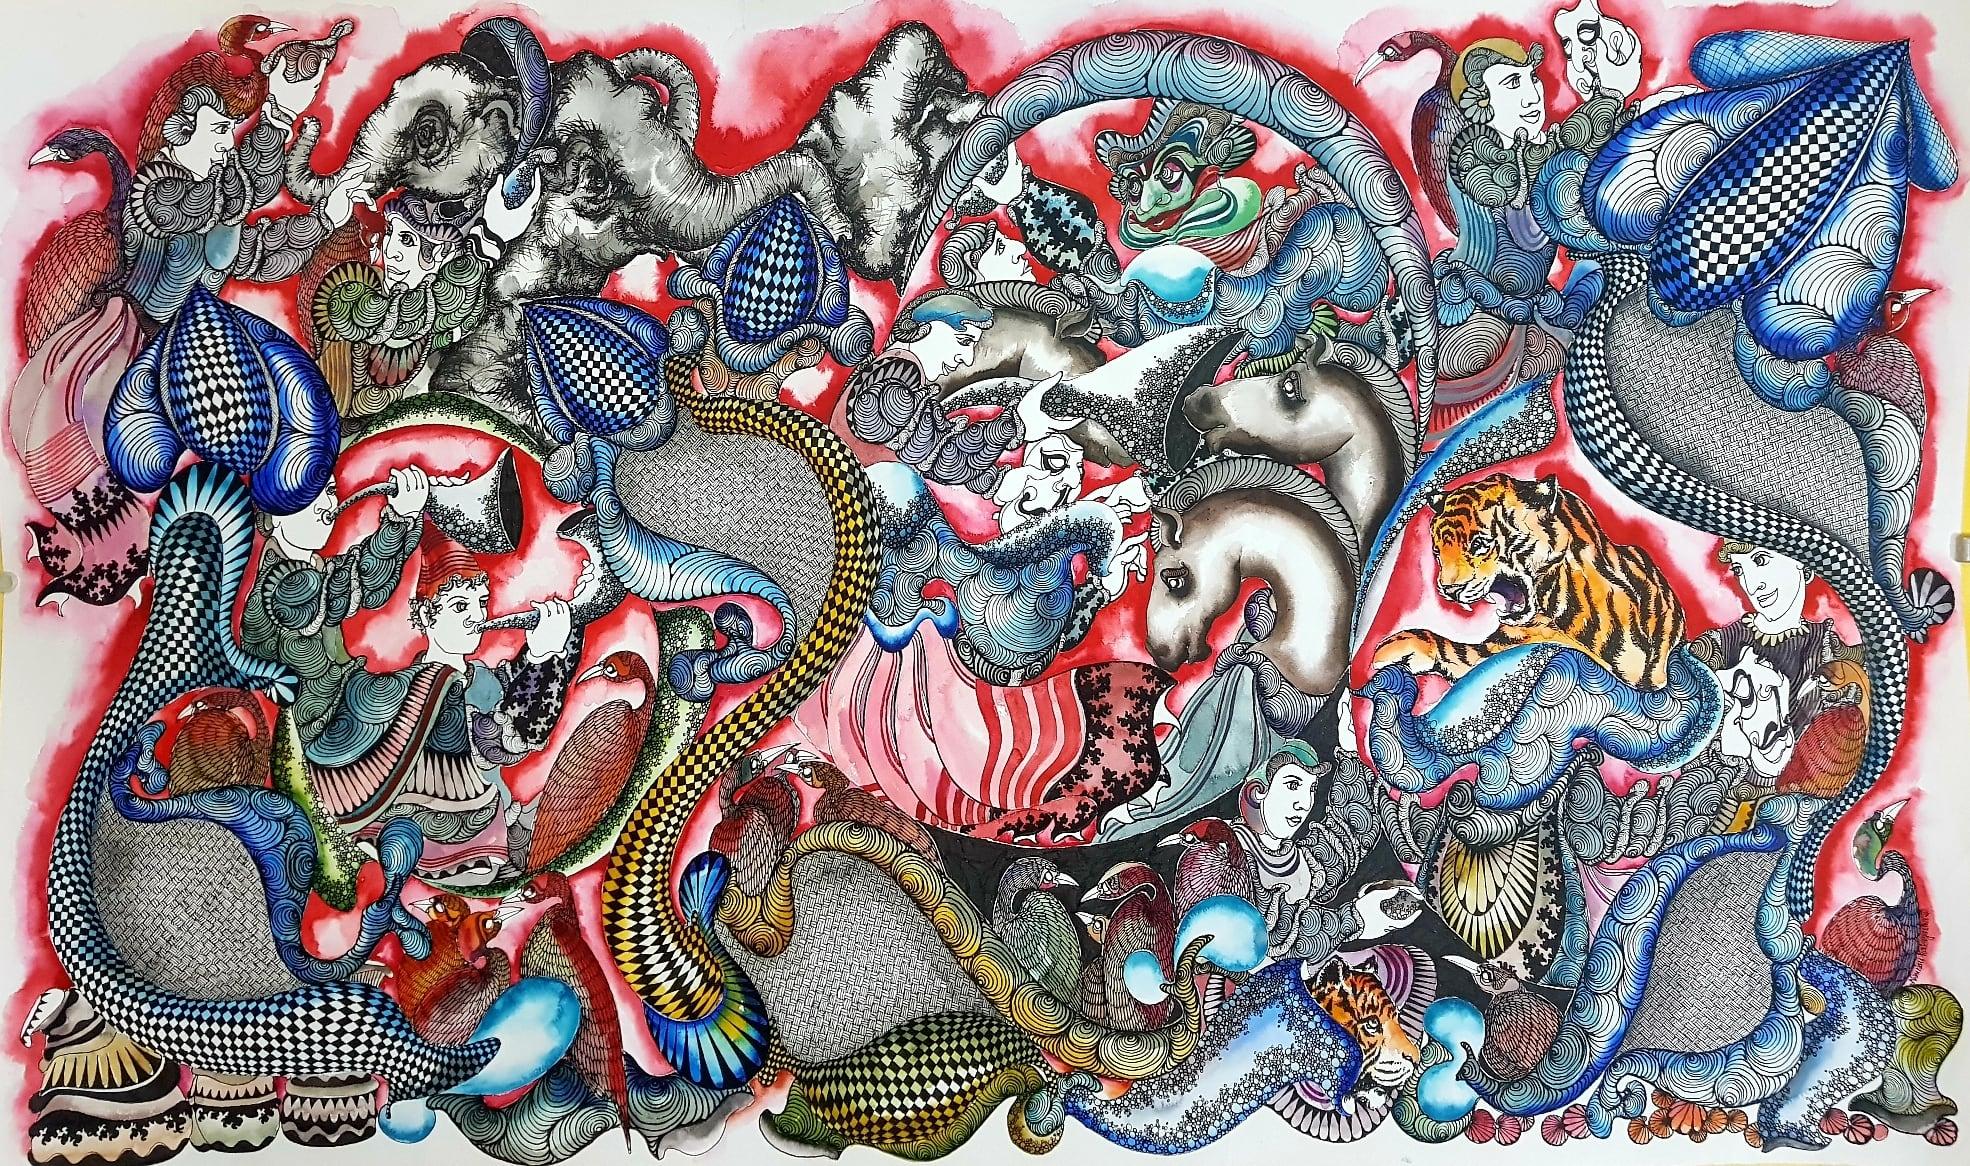 Untitled, Pen & Ink & Watercolor on Paper by Contemporary Artist "In Stock"